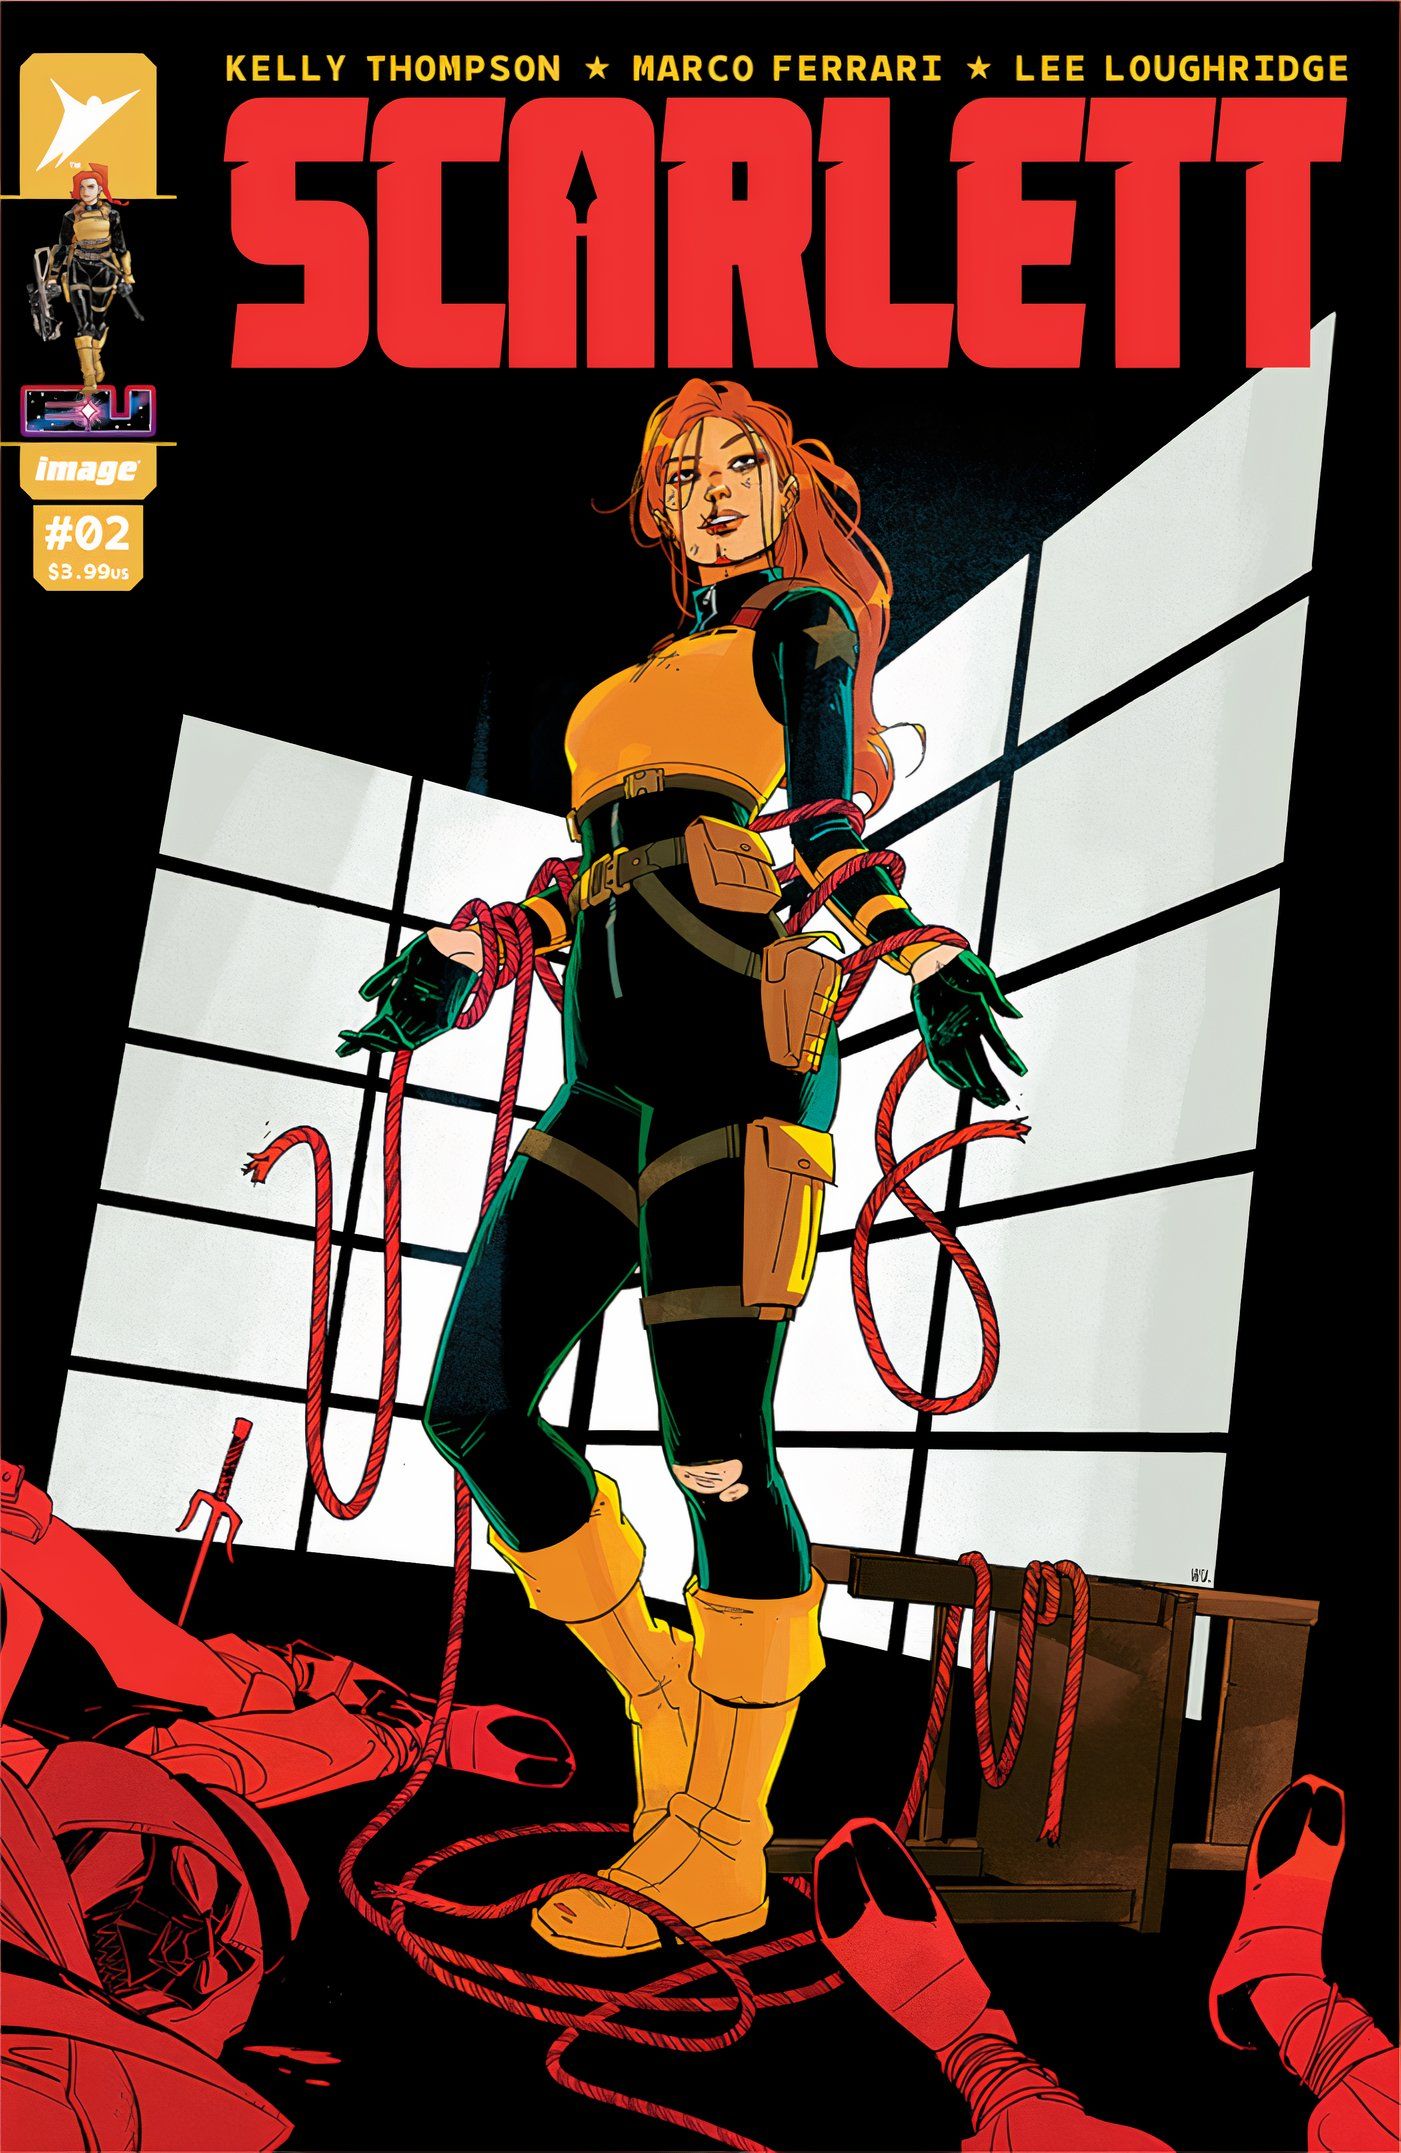 Scarlett #2 variant cover, Scarlett busting out of ropes she was tied in, surrounded by knocked out enemies.